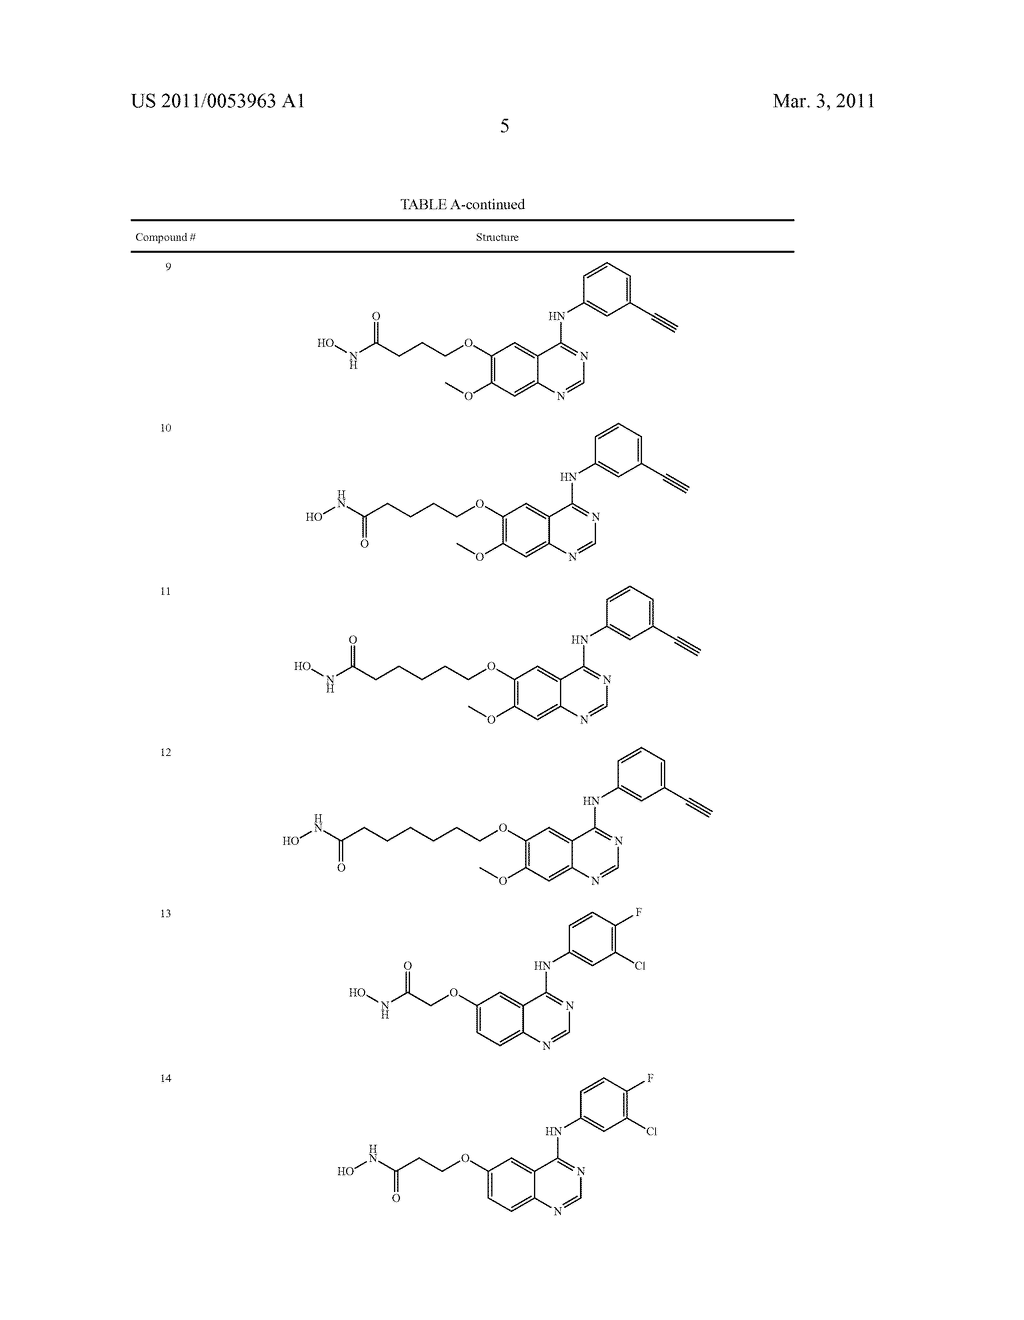 TARTRATE SALTS OF QUINAZOLINE BASED EGFR INHIBITORS CONTAINING A ZINC BINDING MOIETY - diagram, schematic, and image 26